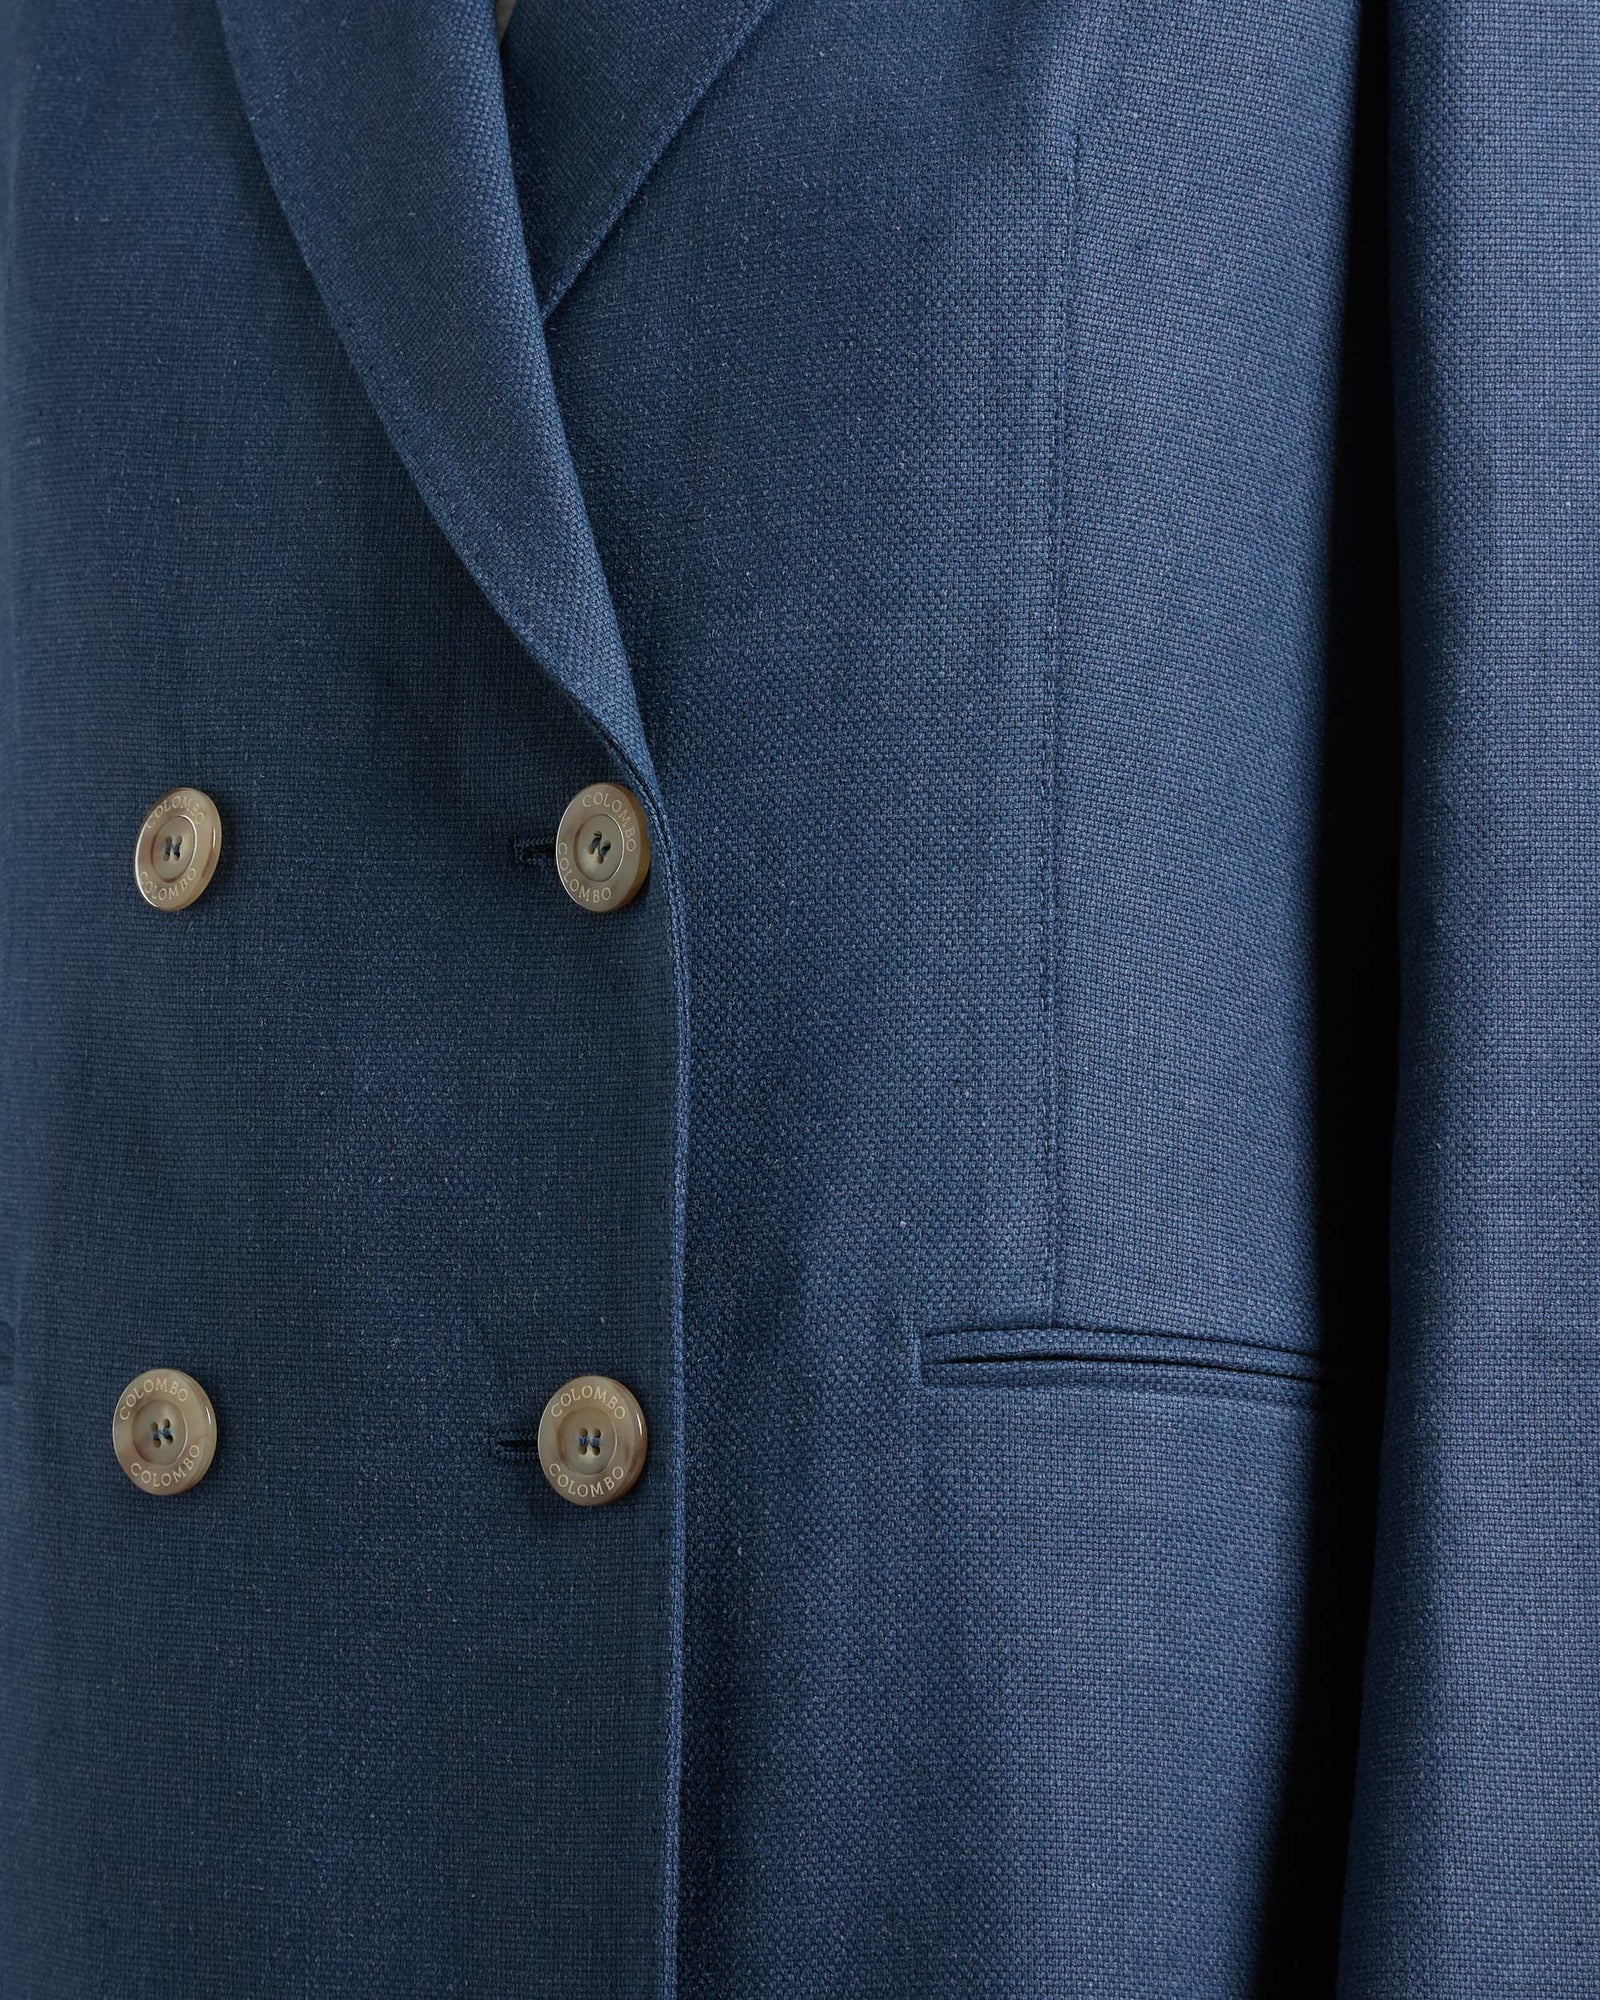 Blue double-breasted jacket